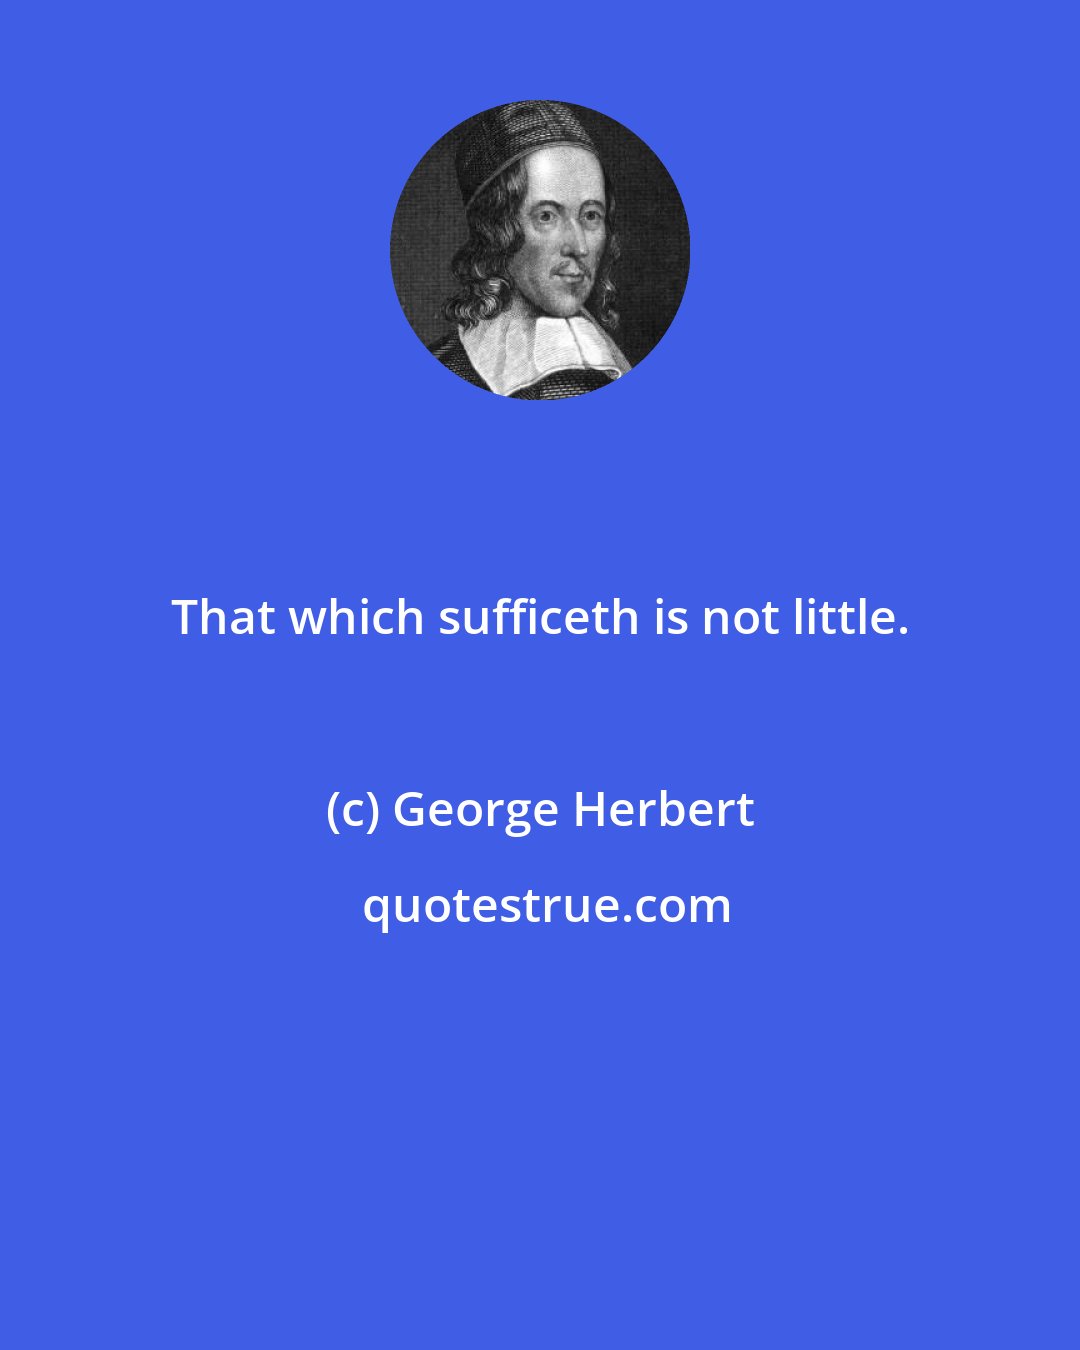 George Herbert: That which sufficeth is not little.